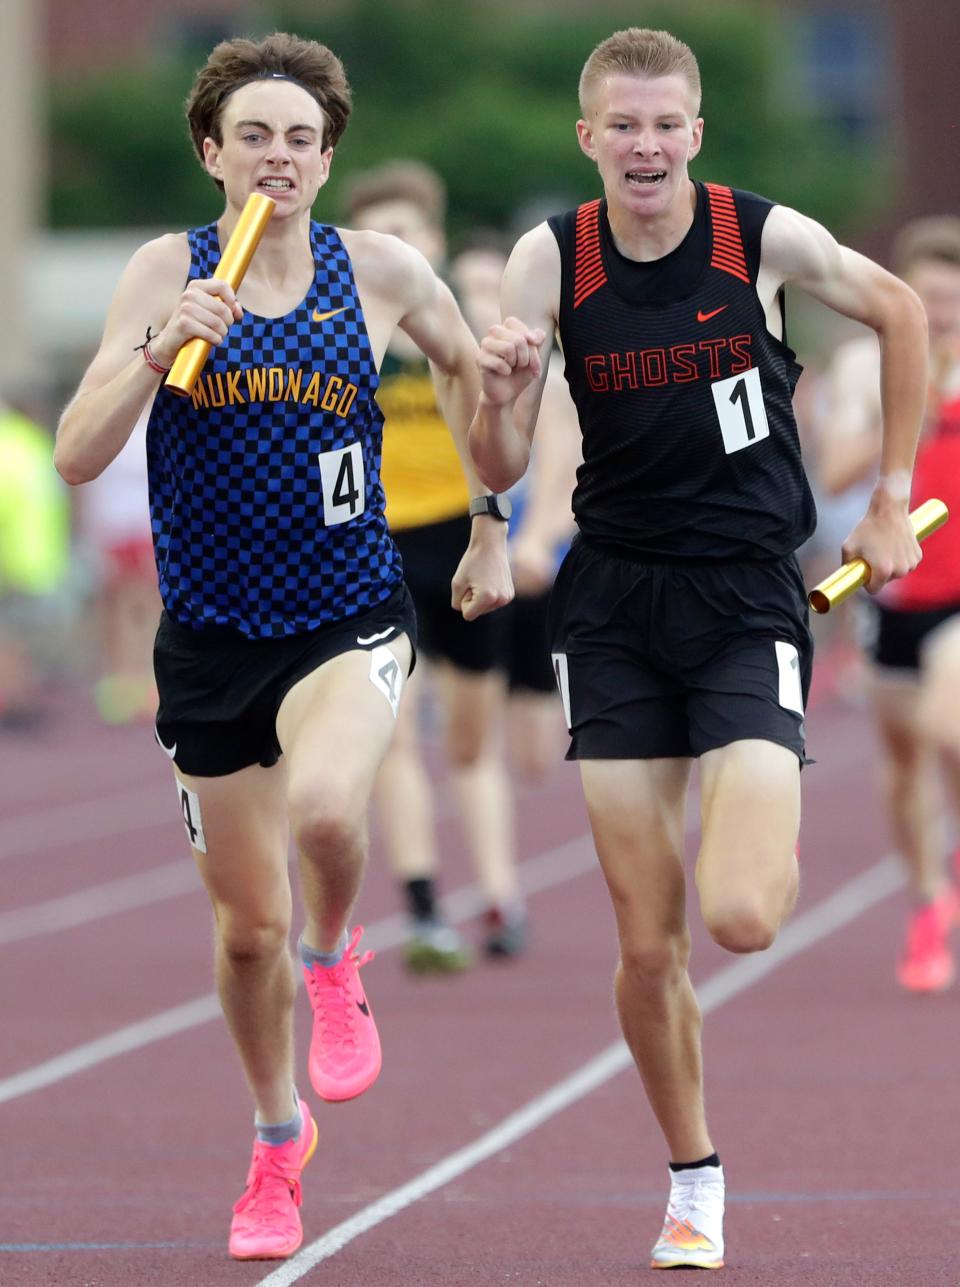 Mukwonago's Joe McNulty passes Kaukauna's Aaron Schimke in the final stretch during Friday's Division 1 3,200 relay at Veterans Memorial Stadium in La Crosse. Kaukauna finished seventh in the race with a time of 7 minutes, 58.99 seconds.